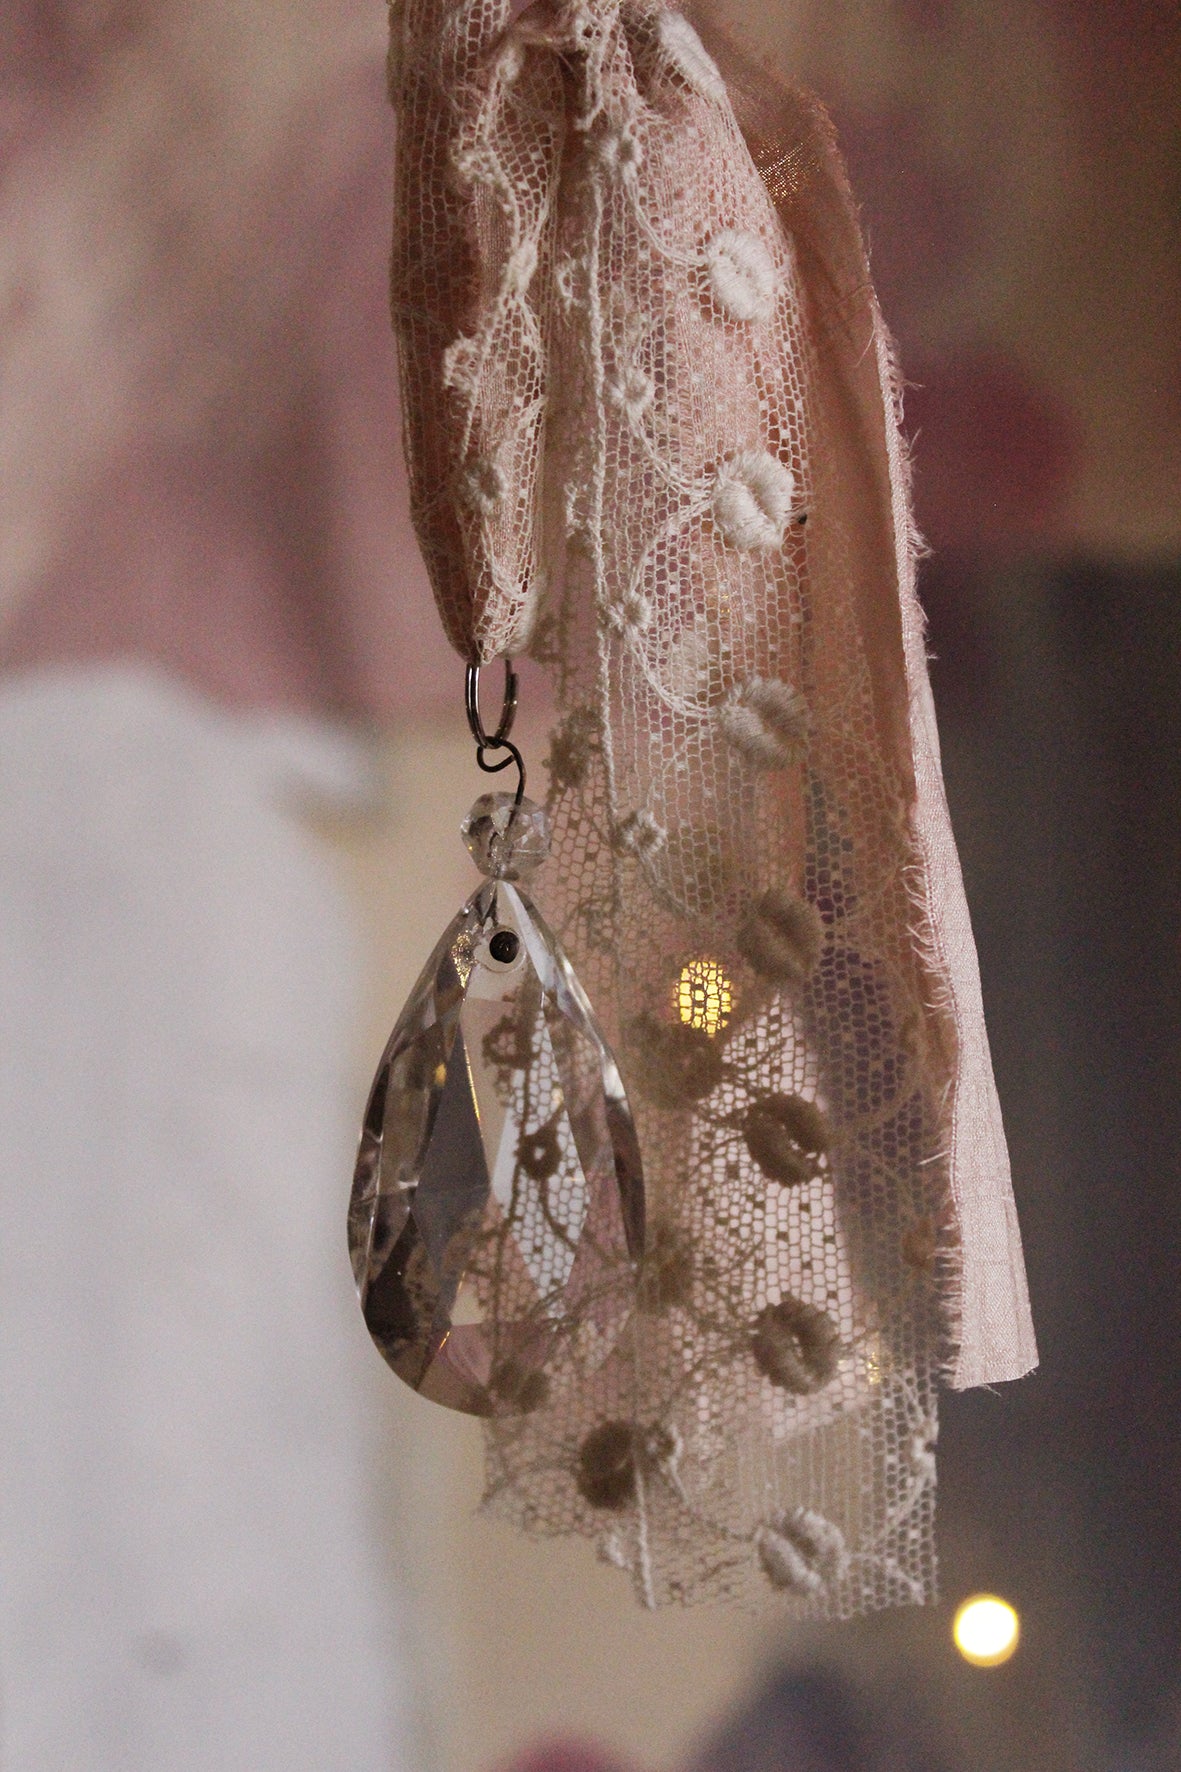 Antique Faceted Teardrop Glass Chandelier Drop With A Warm Pink Silk & Lace Hanger